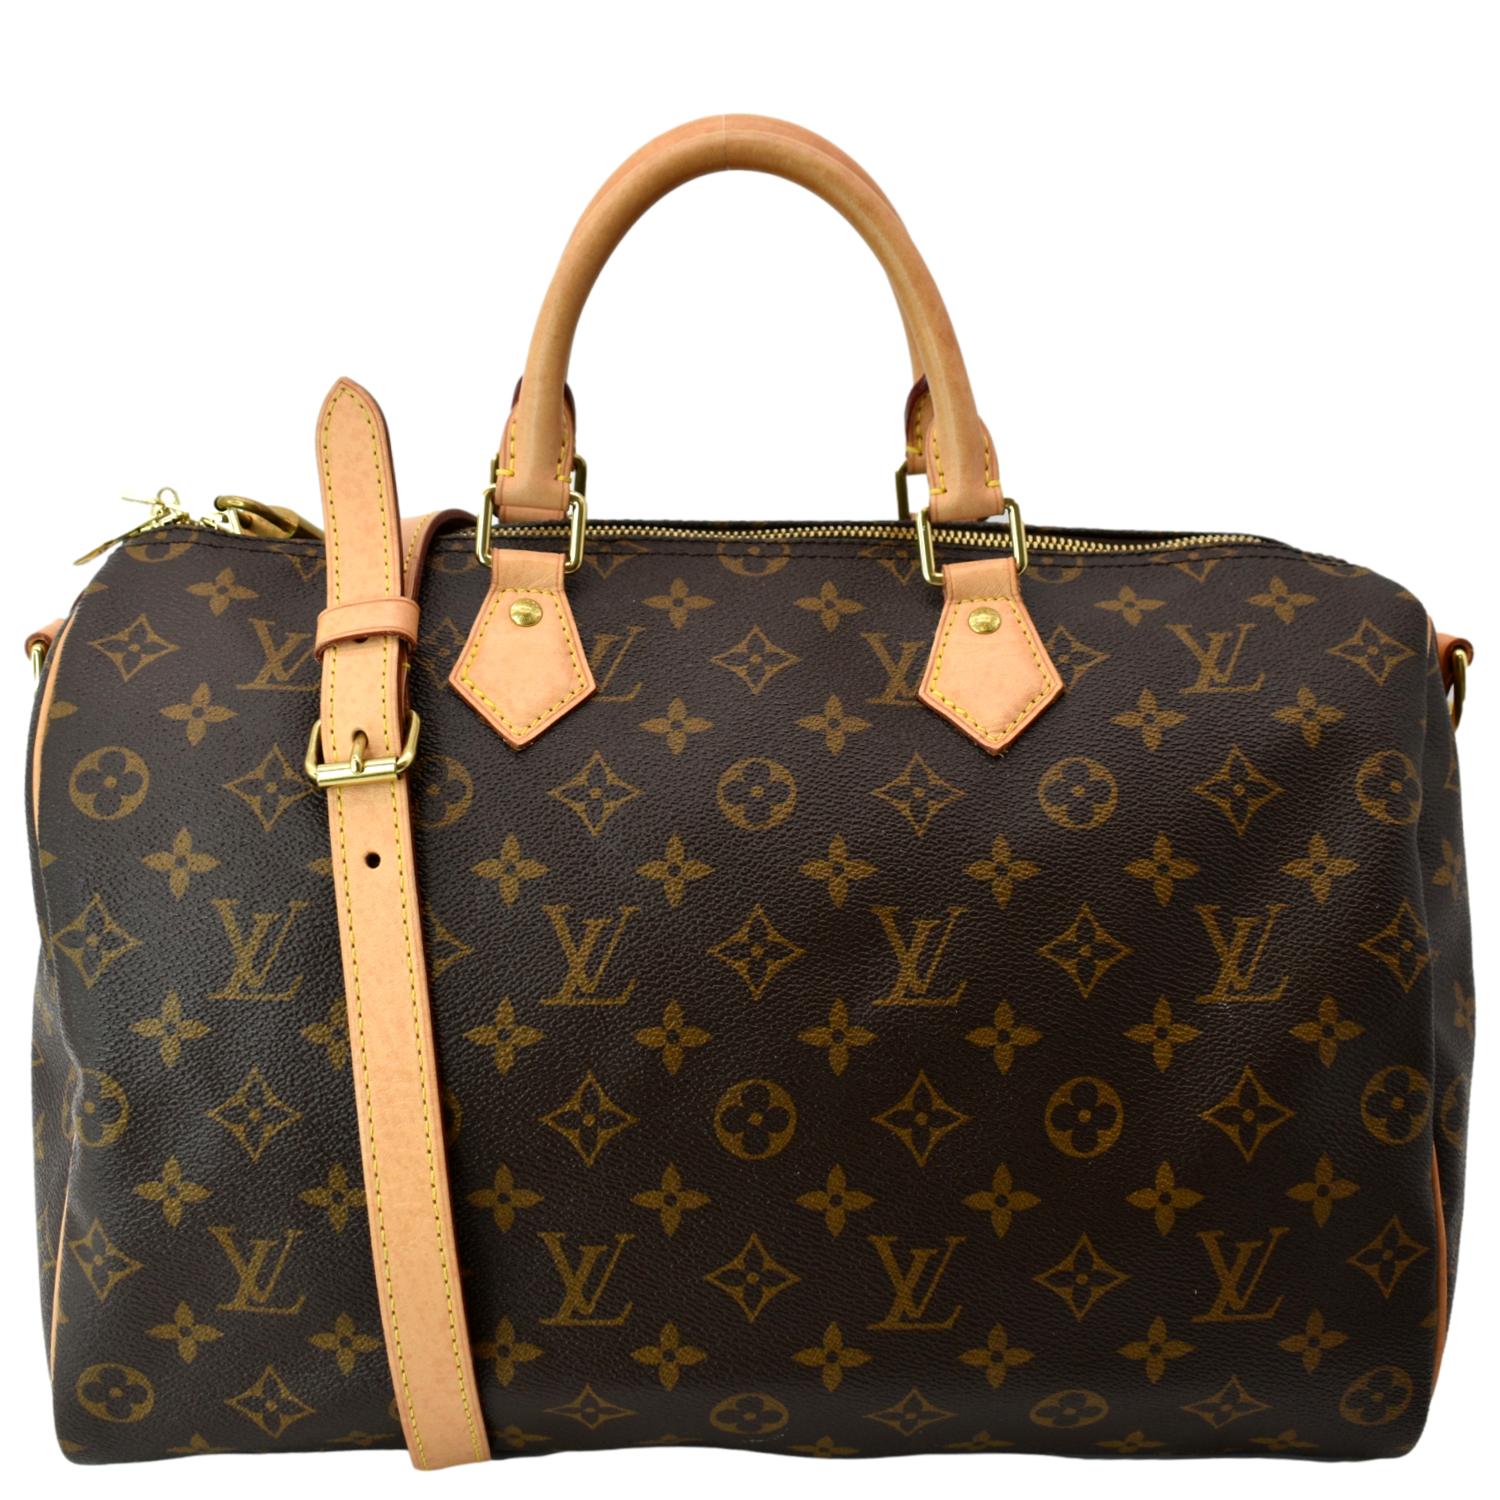 𝓜. on Twitter  Purses and handbags, Louis vuitton bag, Luxury bags